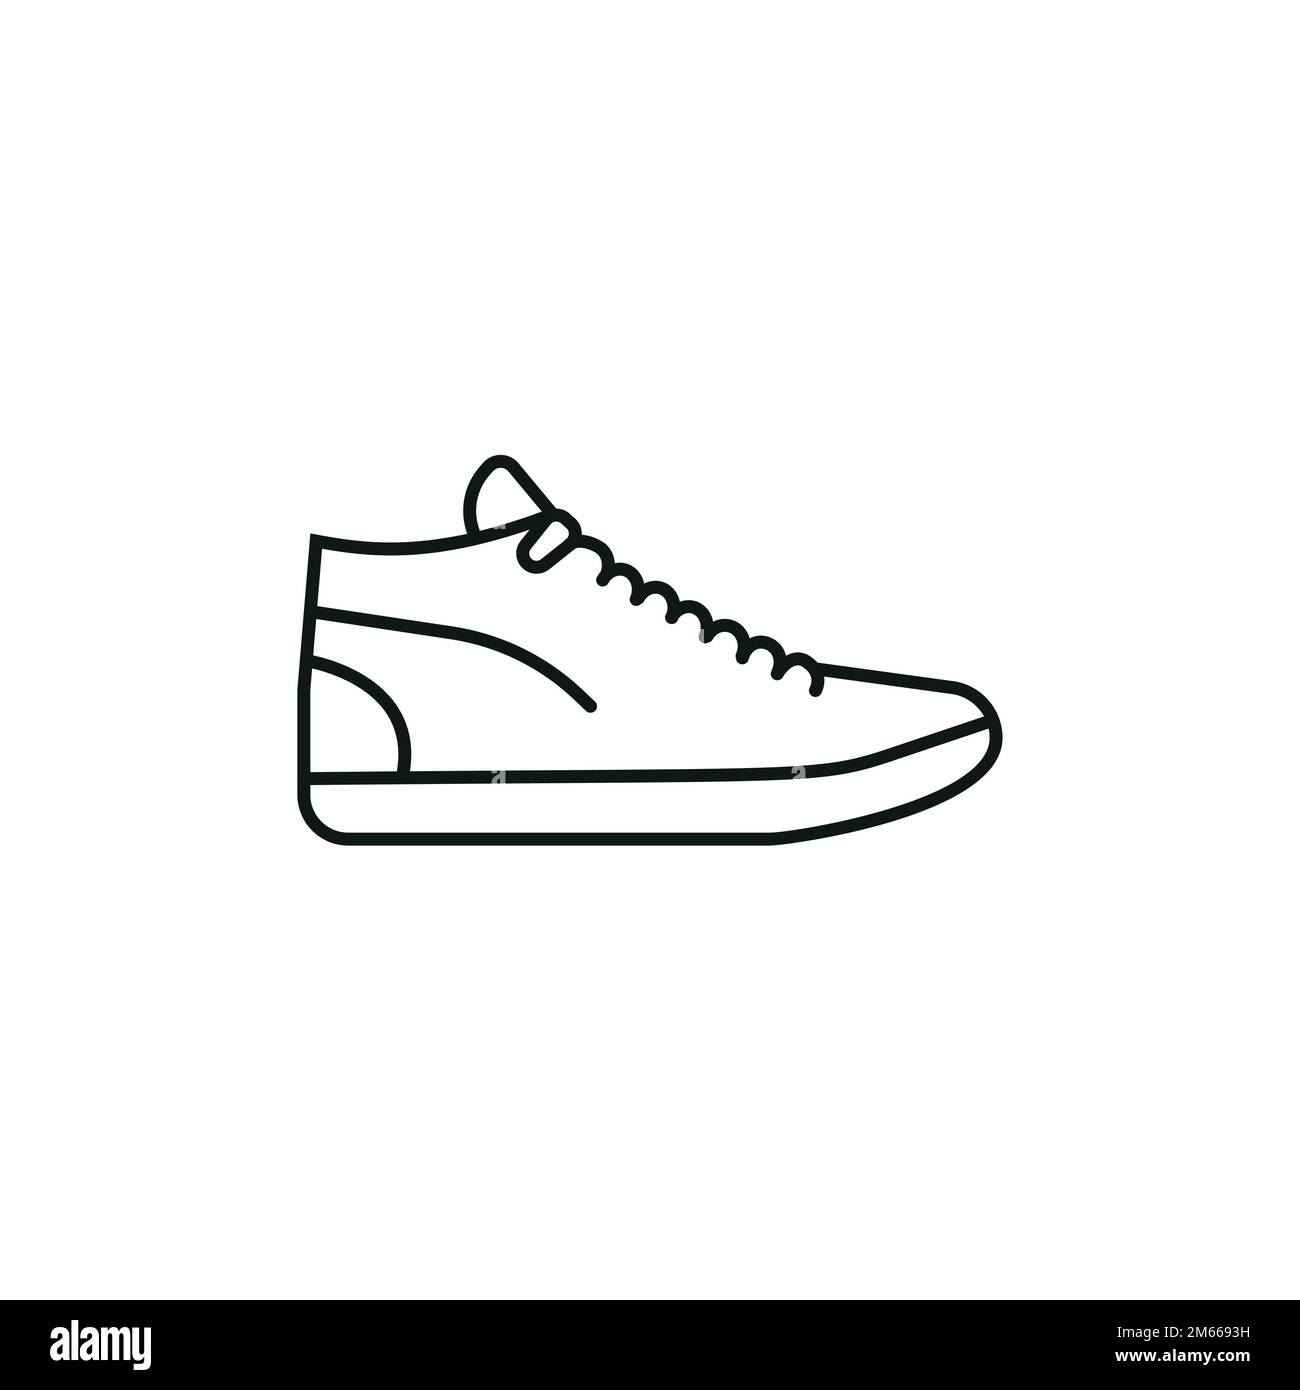 Shoes Sneaker Outline Drawing Vector Sneakers Drawn Sketch Style Black  Stock Vector by ©arraycournicova@gmail.com 670009180